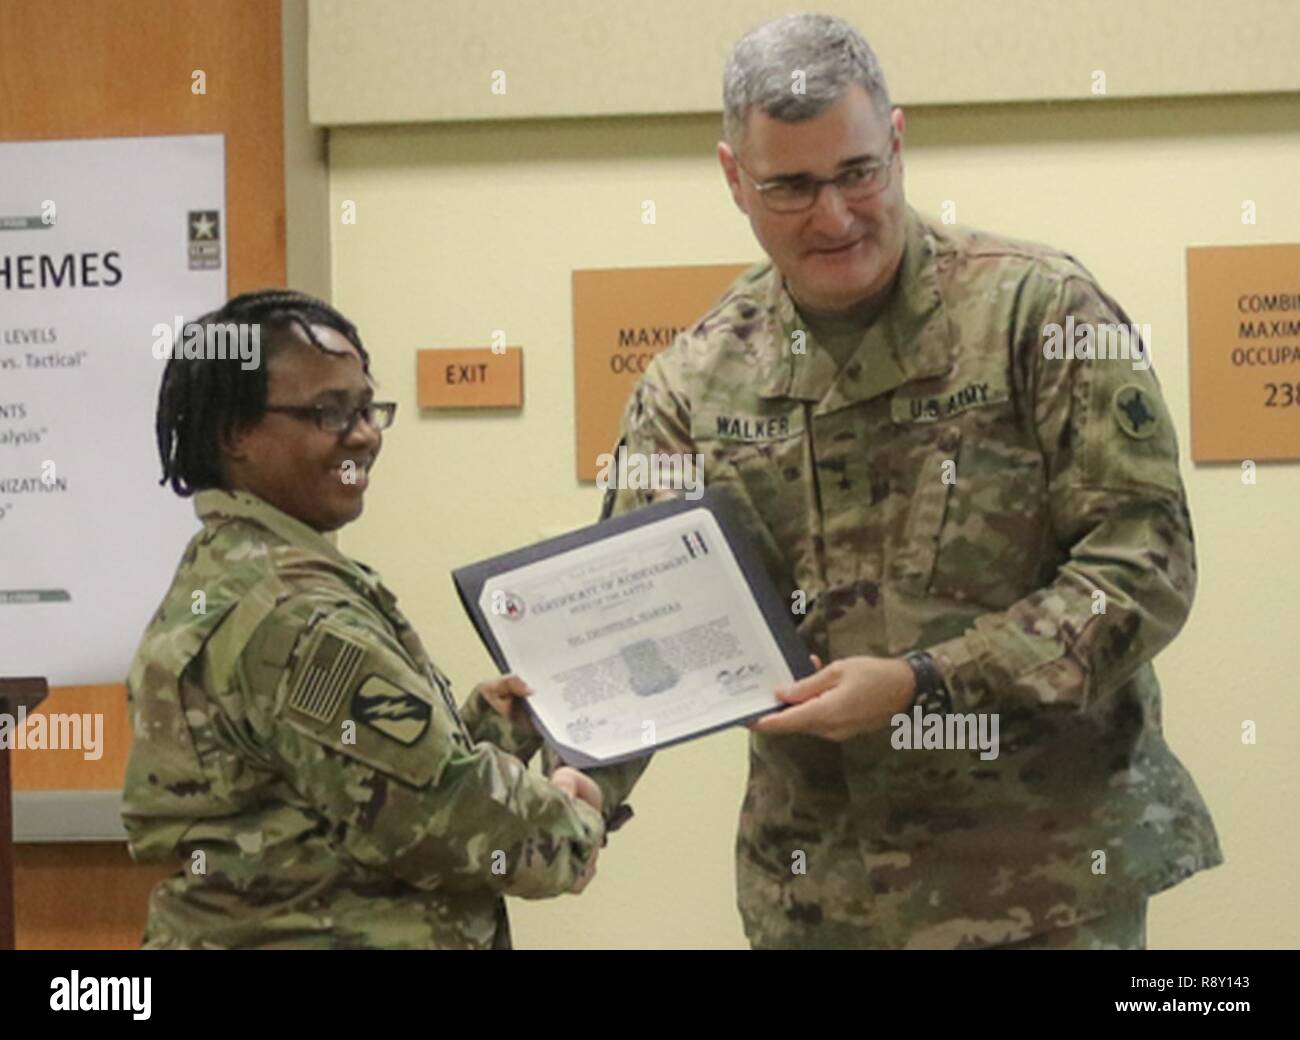 Staff Sgt. Marieka Thompson, 184th Sustainment Command receives a Hero of The Battle certificate from Brig. Gen. Clint E. Walker, 184 SC commander. Thompson was awarded for her professionalism and proficiency during the units validation for the upcoming deployment. Stock Photo